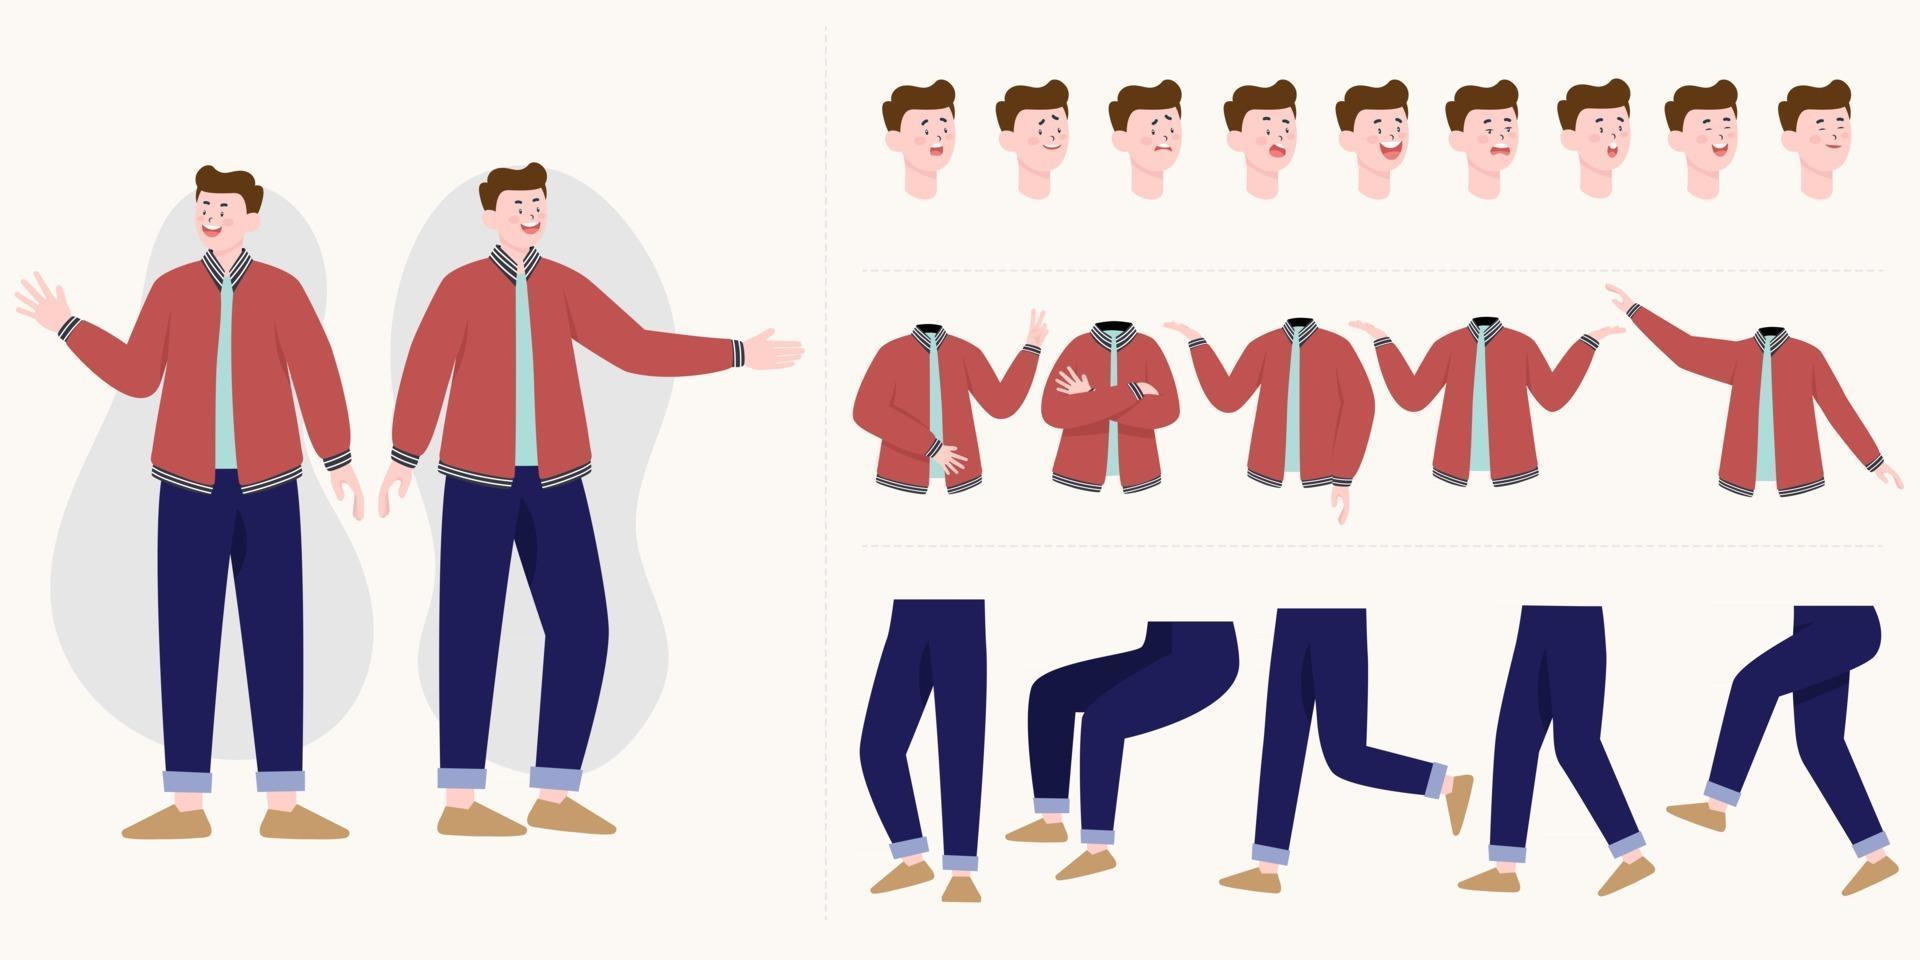 Handsome man constructor in flat style. Parts of body legs and arms , face emotions, haircuts and hands gestures. Vector cartoon Man character